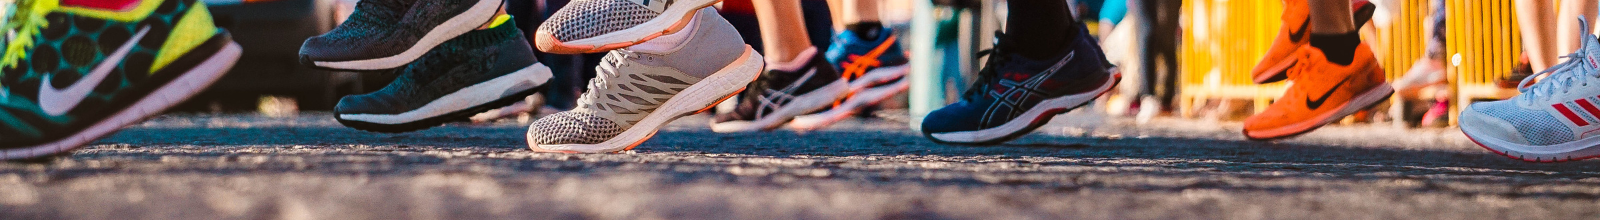 Running shoes in a group of people